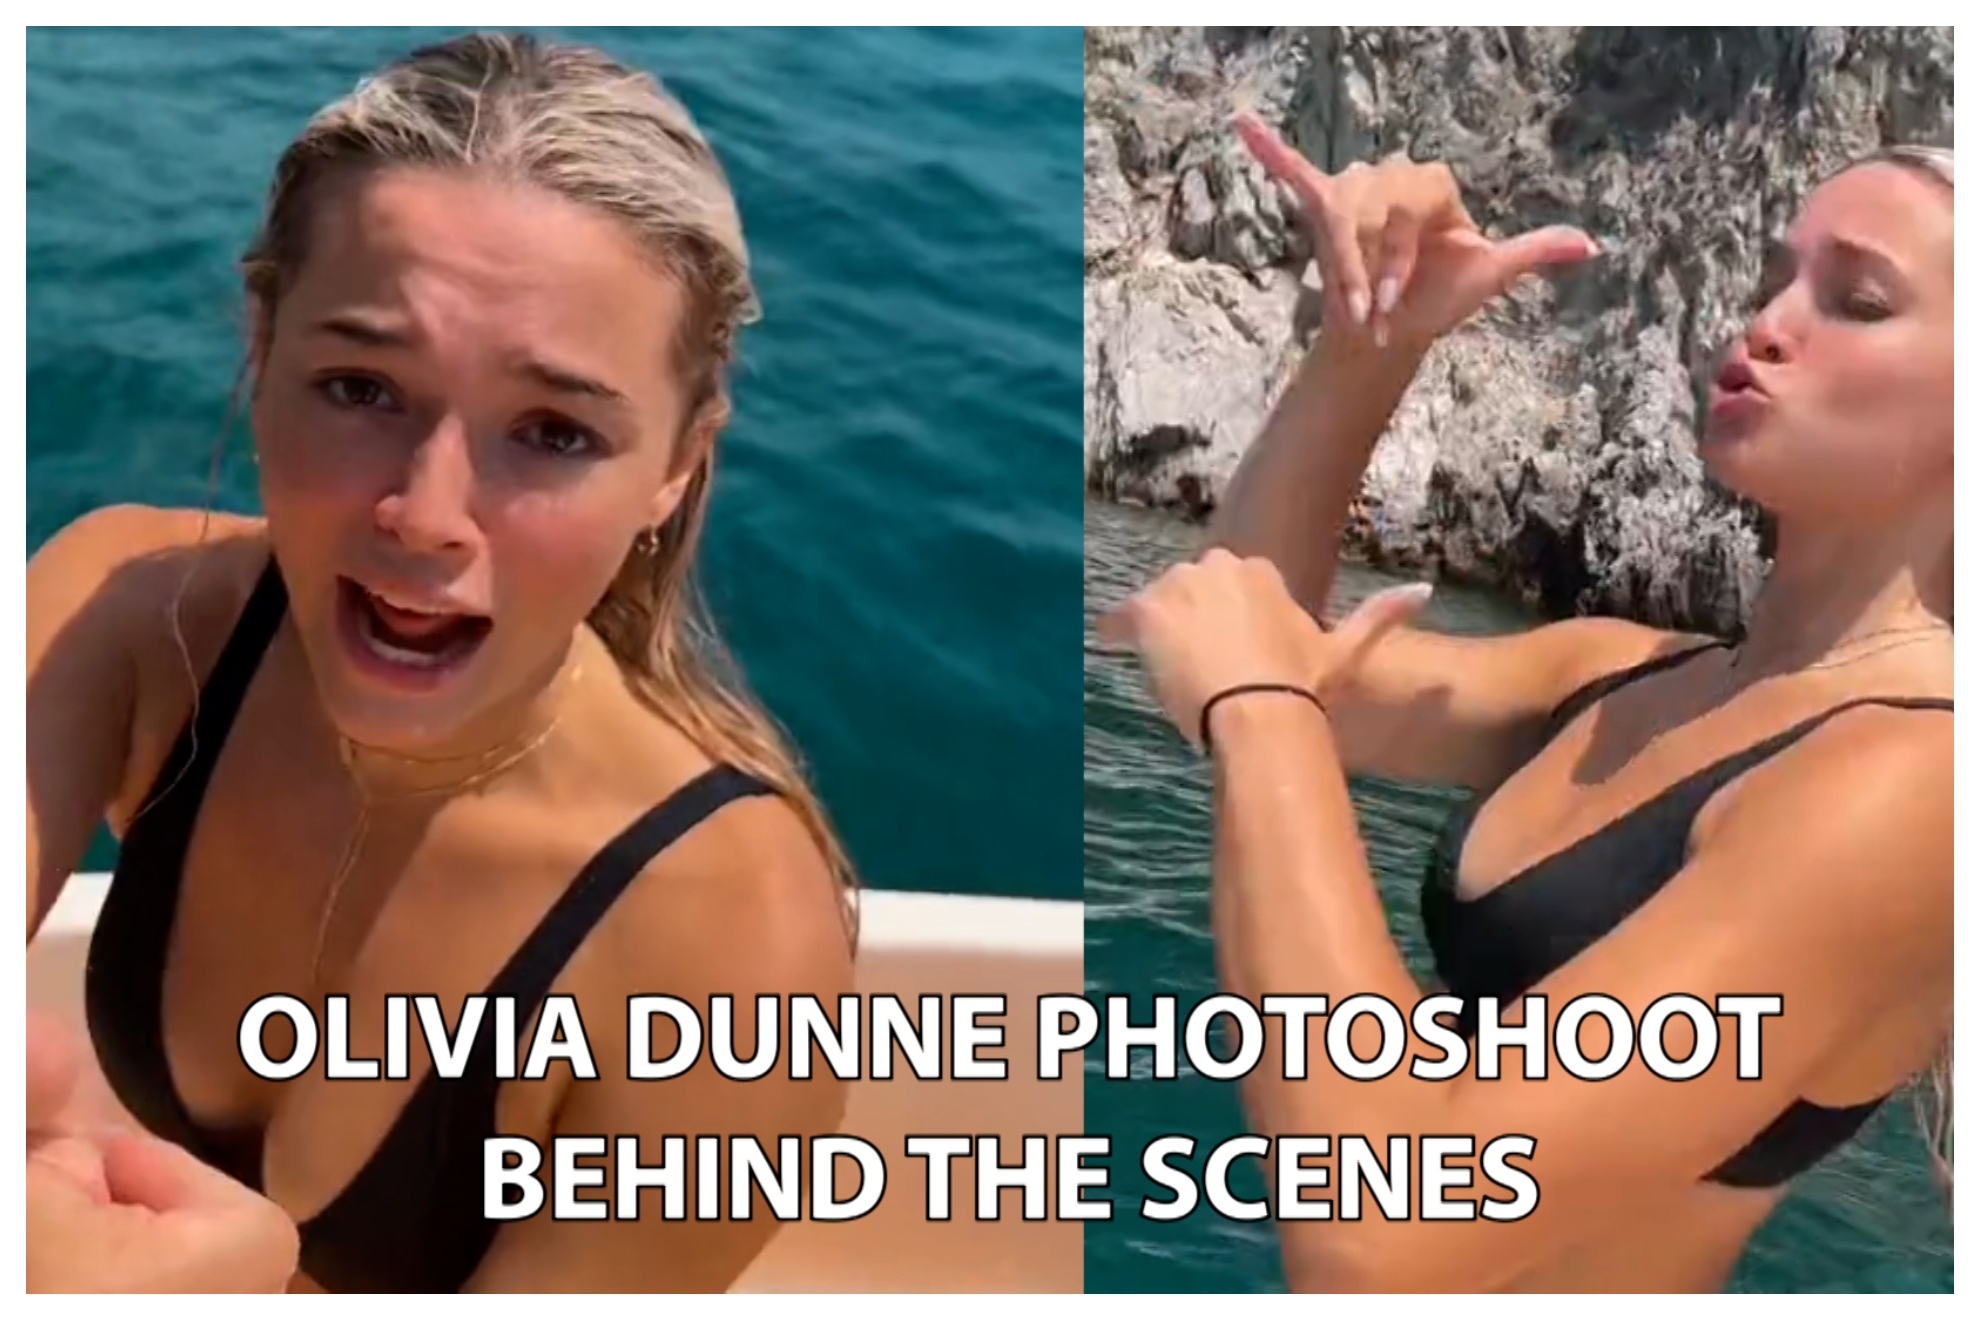 Olivia Dunne's 'forgotten' sister shares behind the scenes bikini videos from their trip in Italy